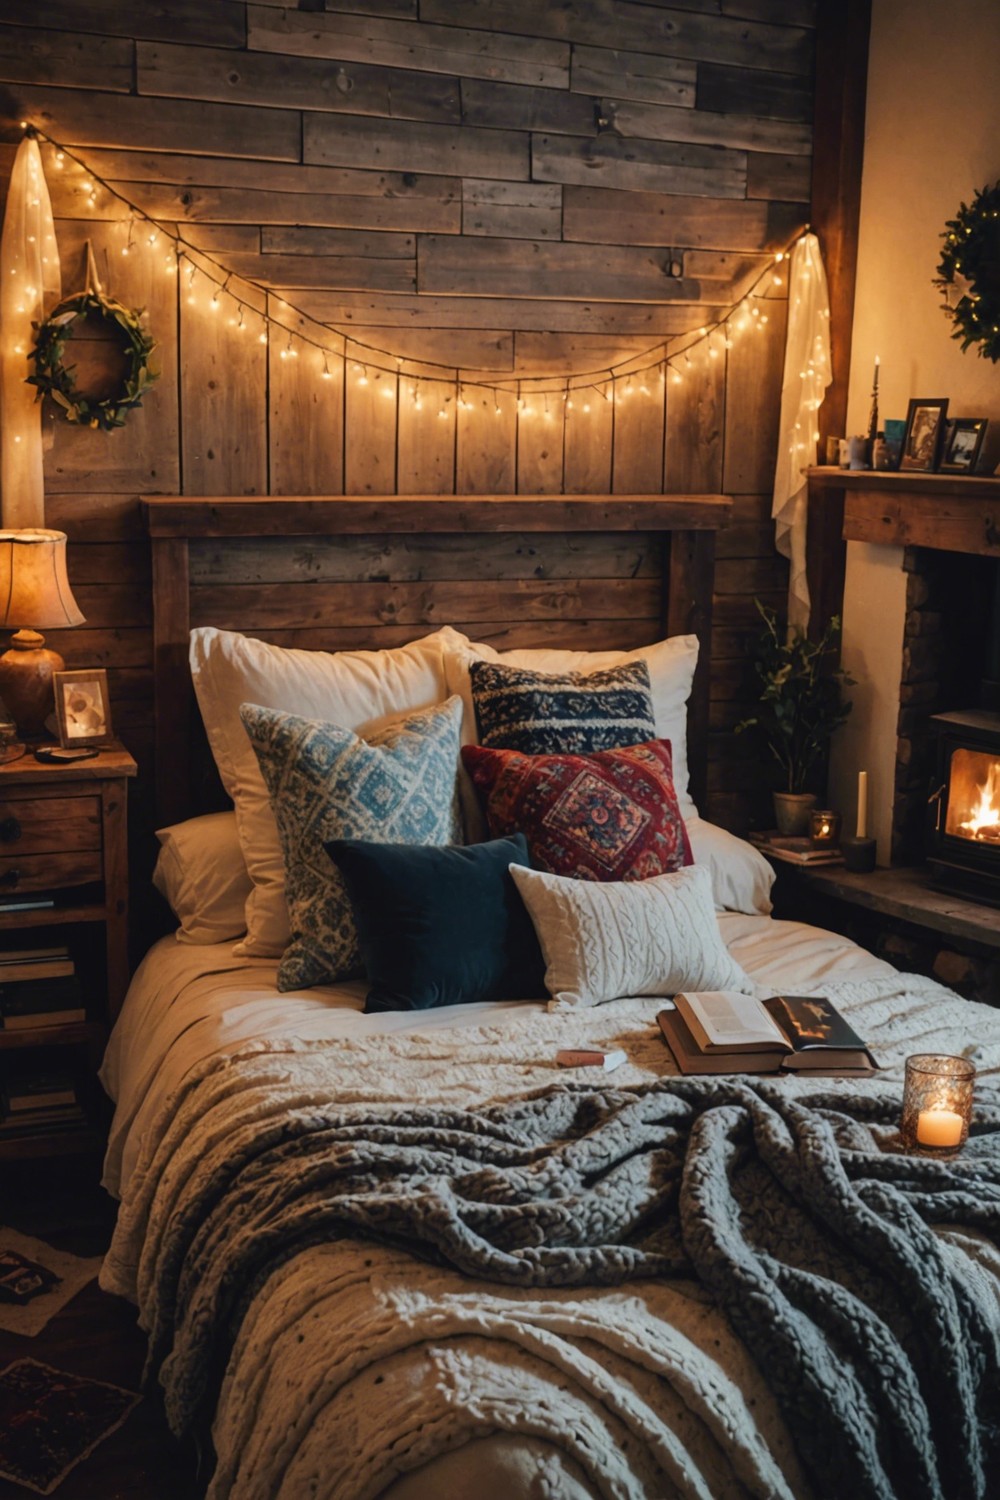 Whimsical Ambiance with Fairy Lights: